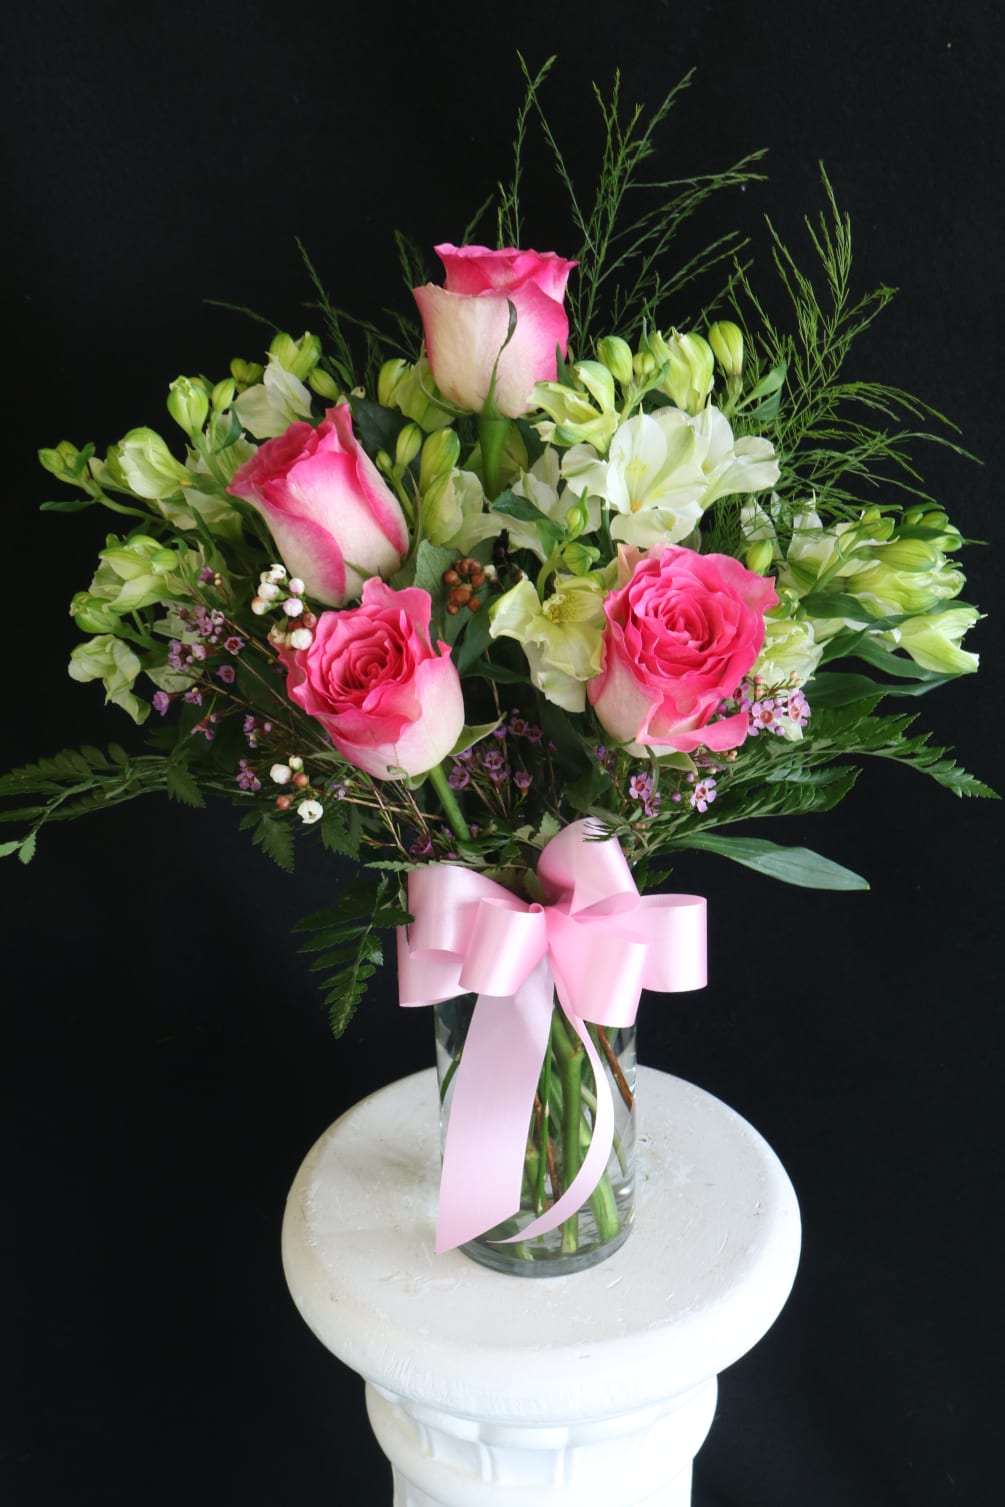 4 pink roses, 4 white alstroemeria, and greens